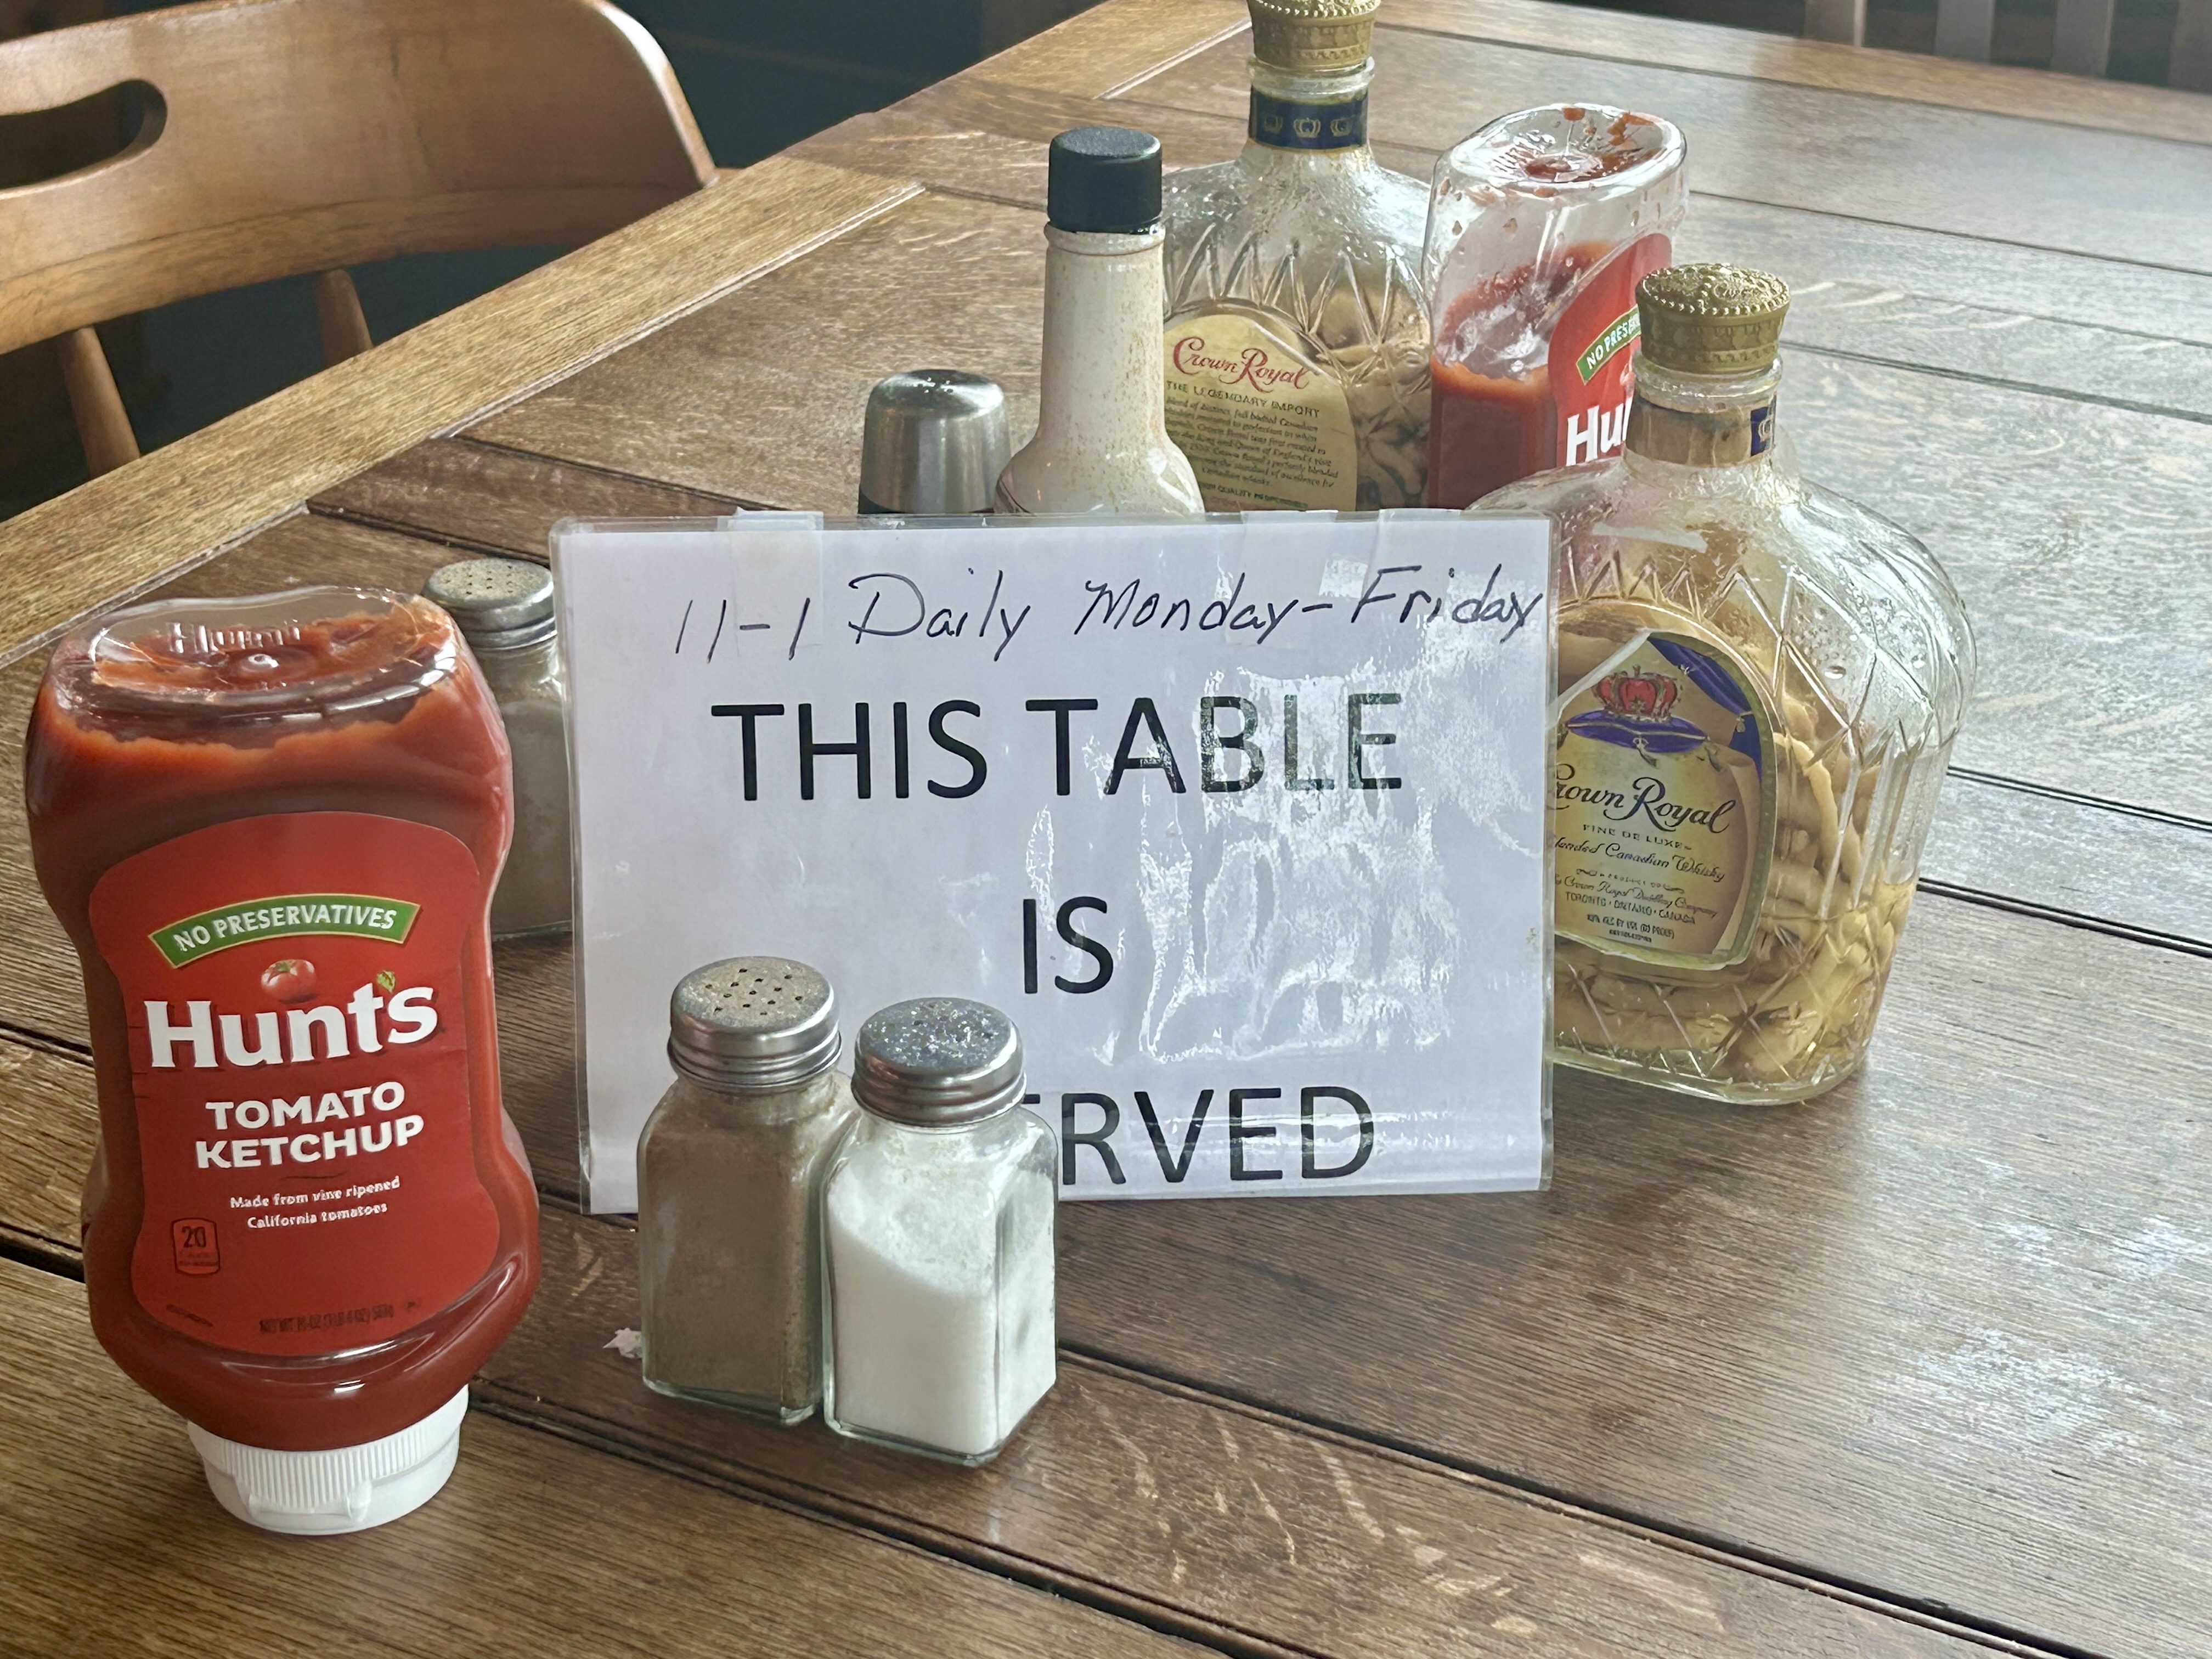 This special table is reserved for group of regulars who eat lunch at Jackson’s Station every Monday through Friday from 11 to 1 p.m.